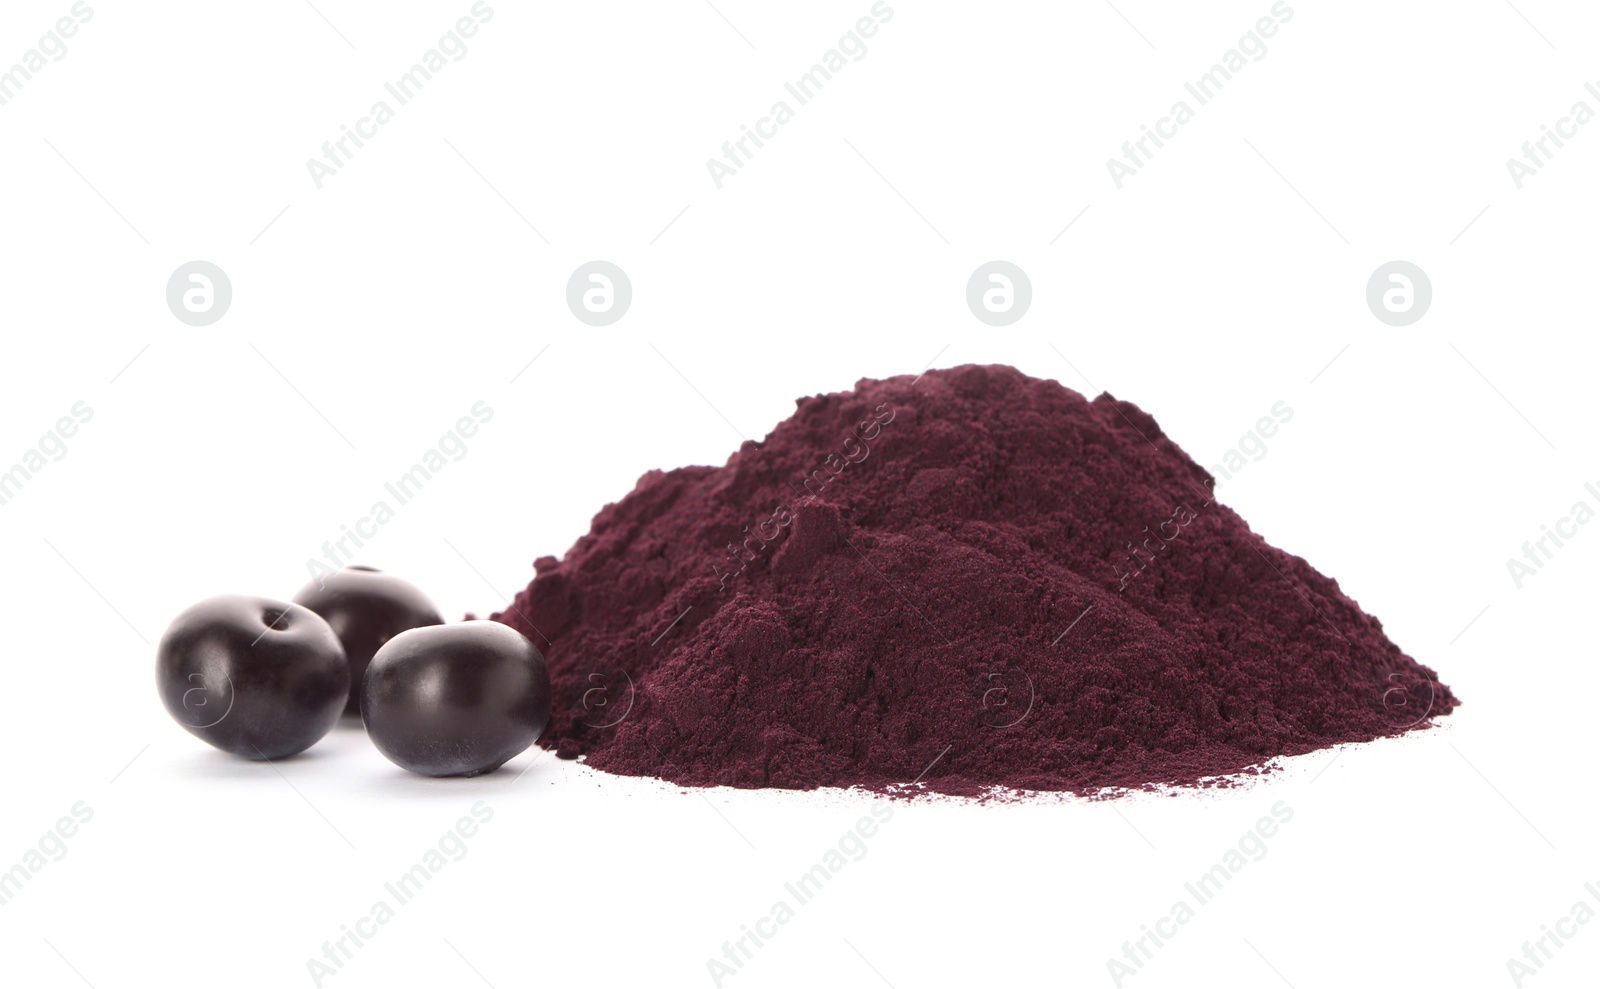 Photo of Pile of acai powder and berries on white background